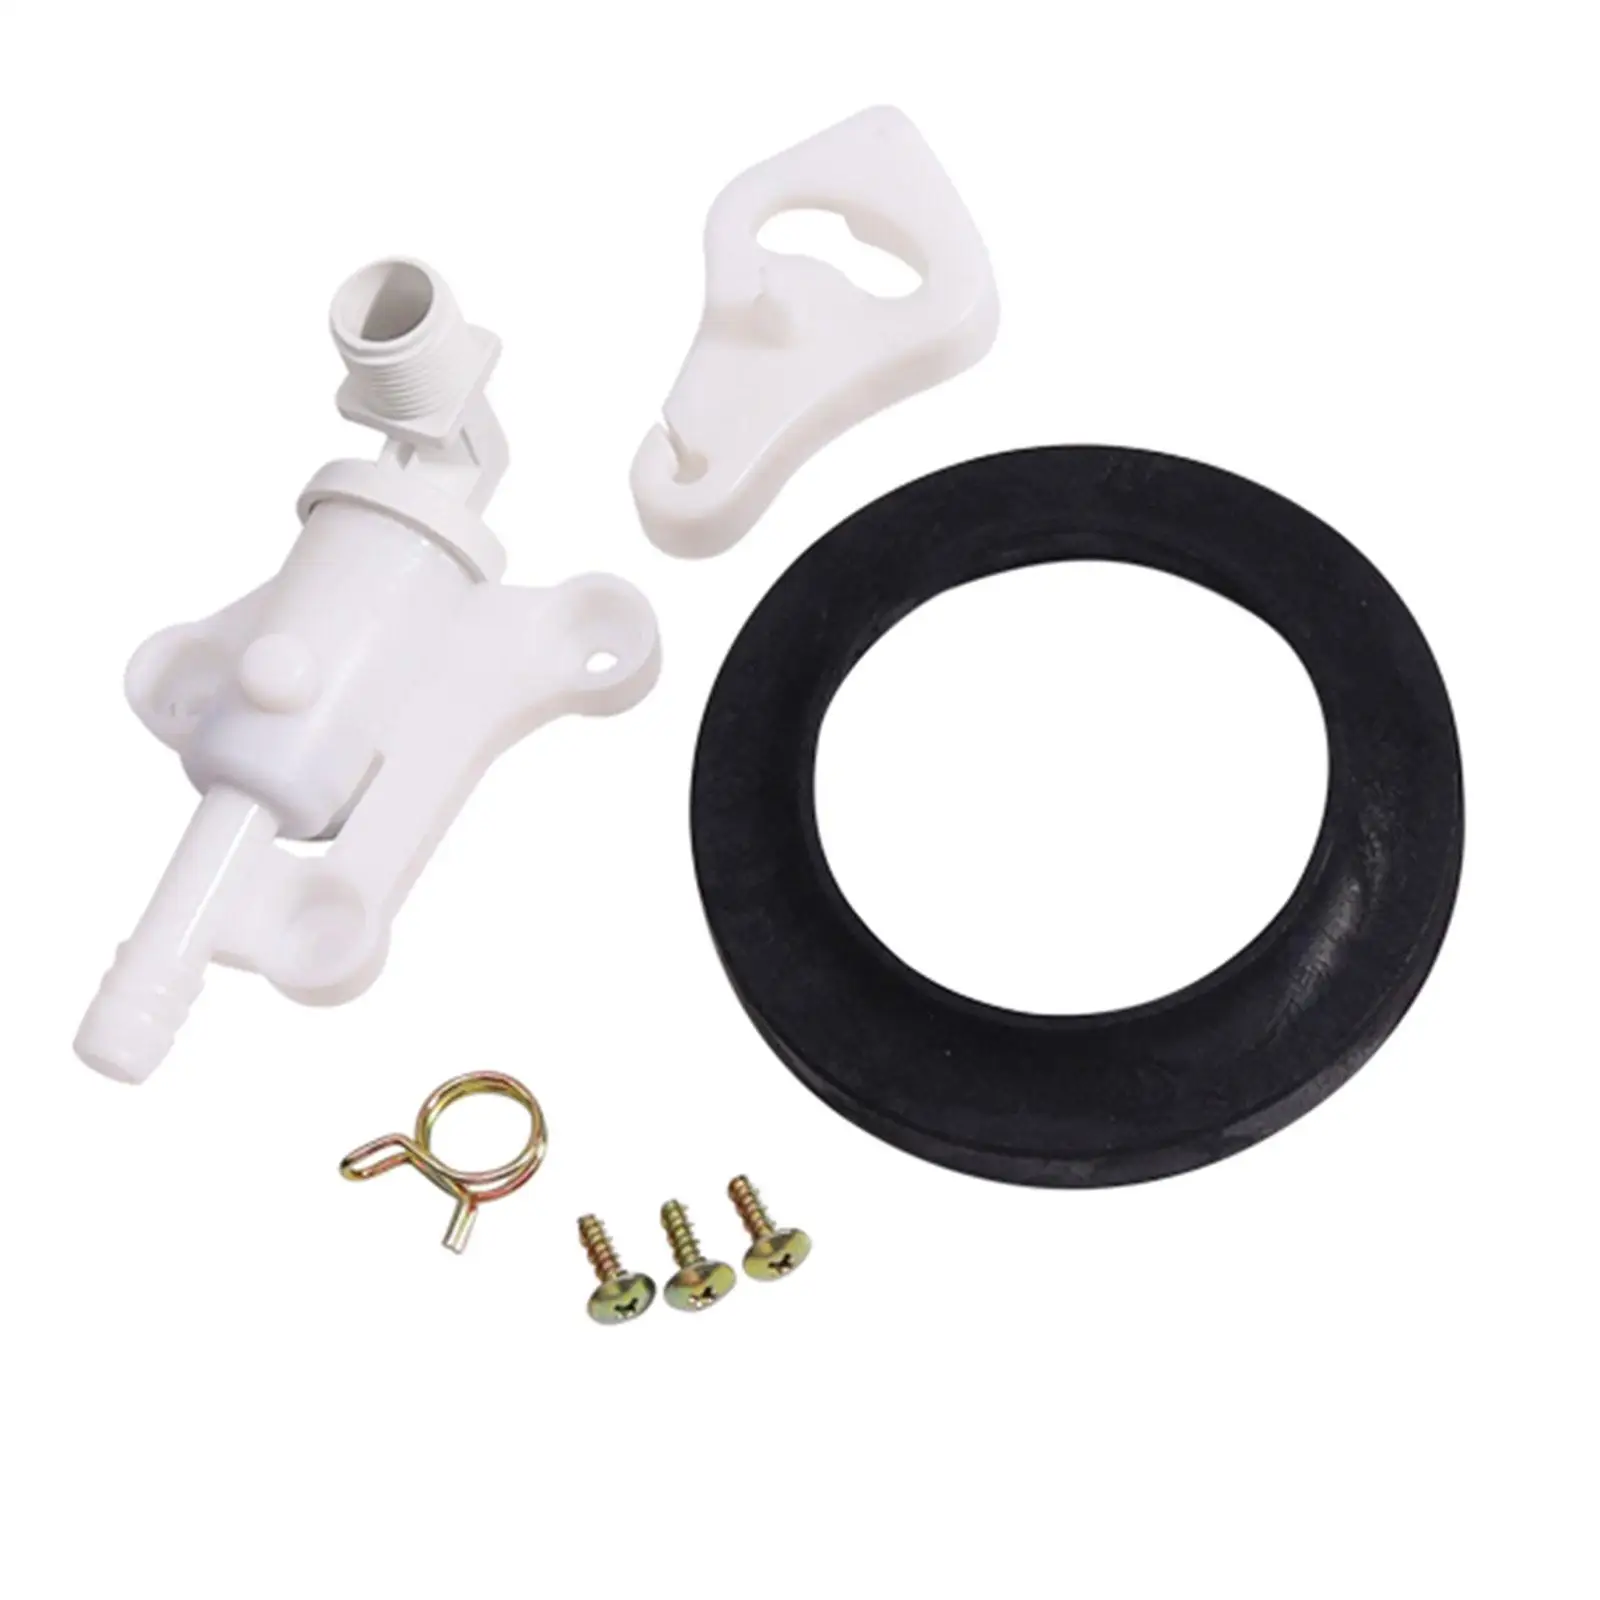 34100 RV Toilet Water Valve Durable Replacements for Style Plus